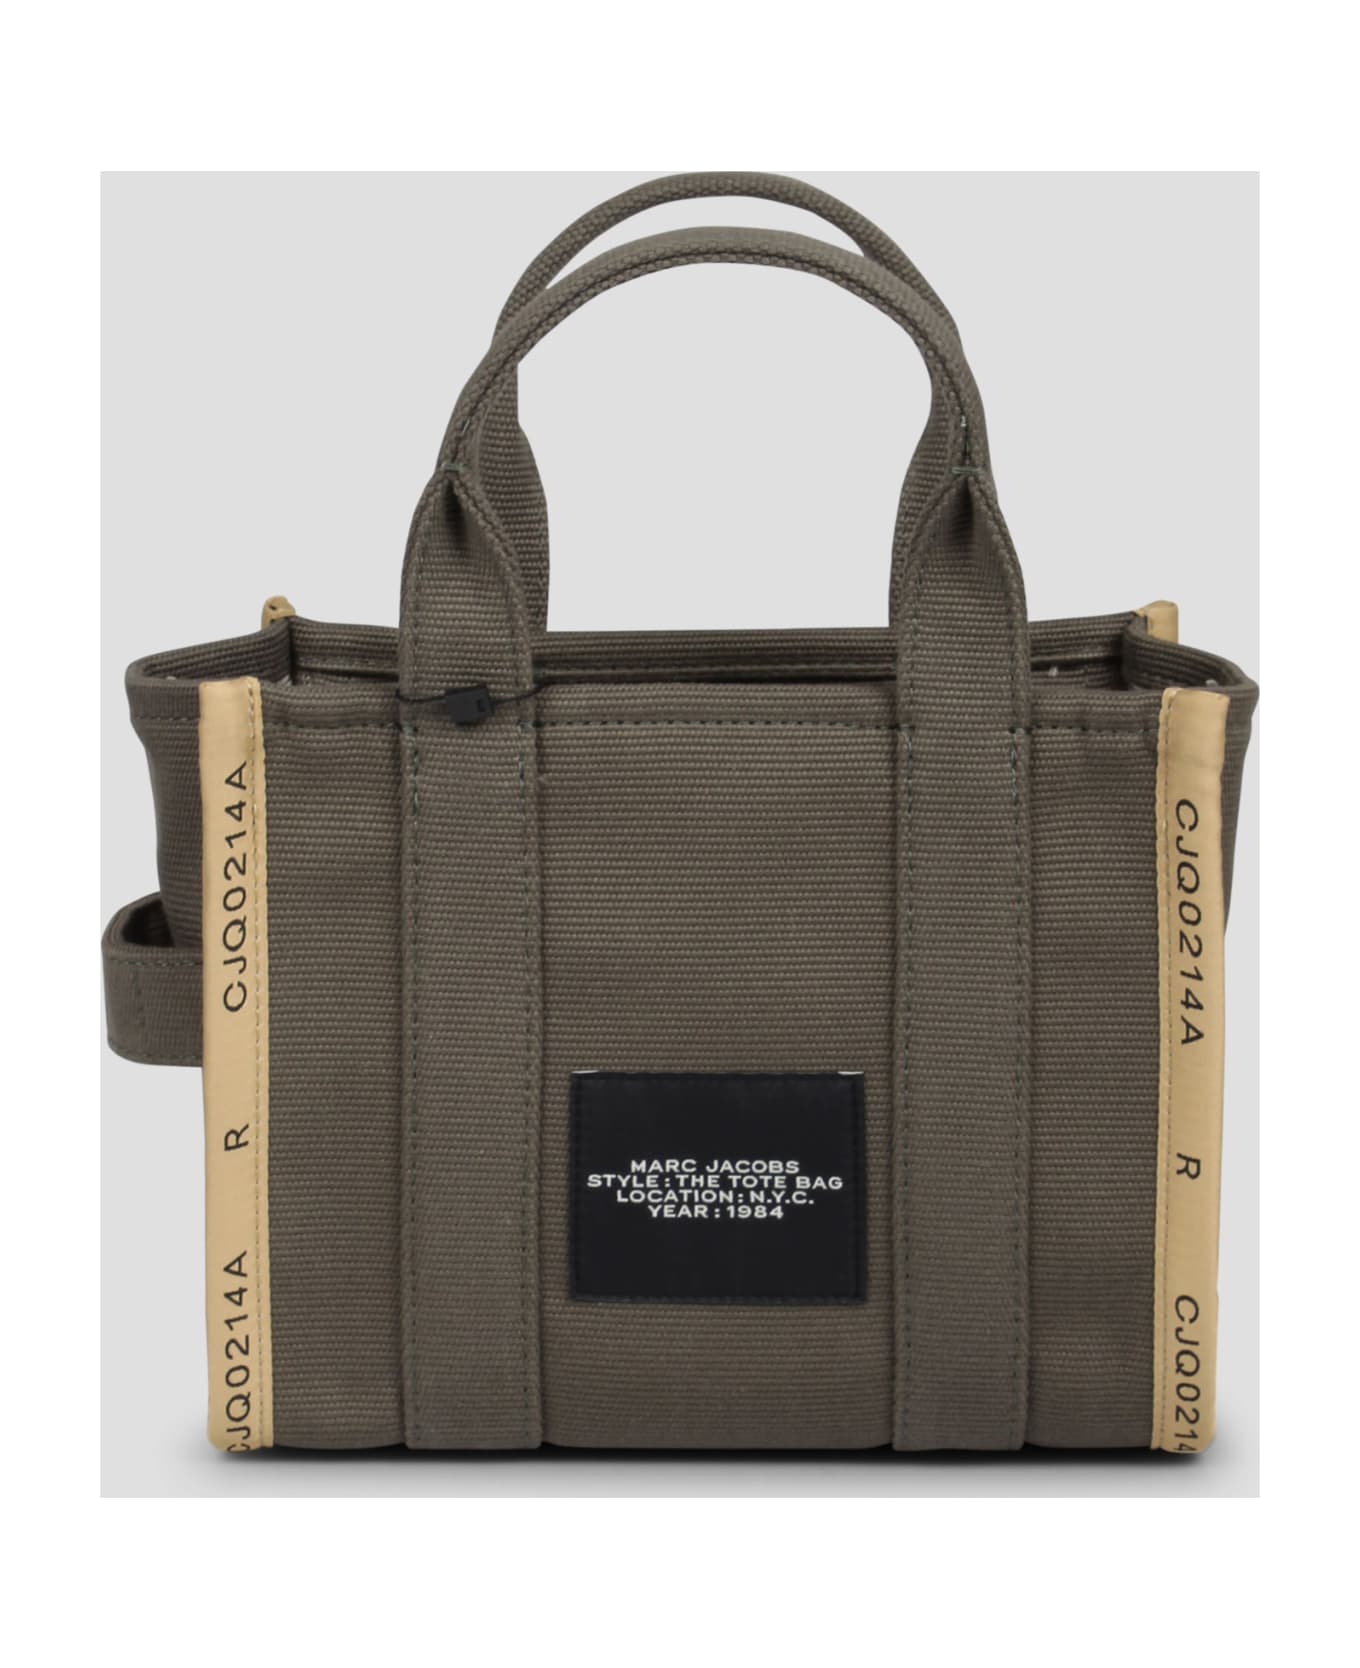 Marc Jacobs The Jacquard Small Tote Bag - Green トートバッグ